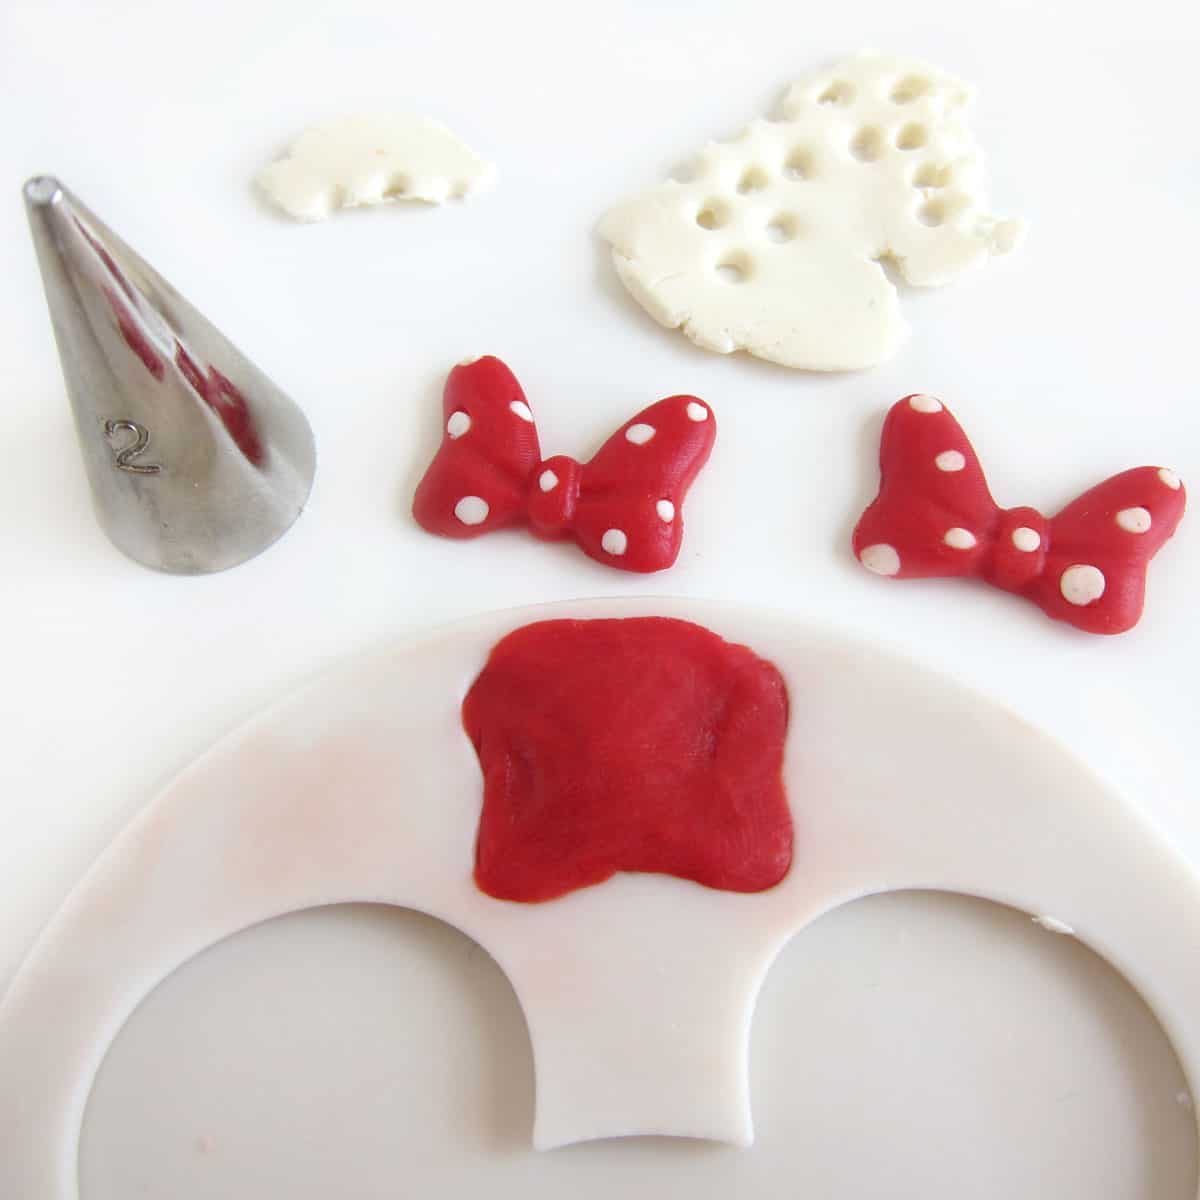 red and white polka dot Minnie Mouse bows made in a silicone mold using modeling chocolate